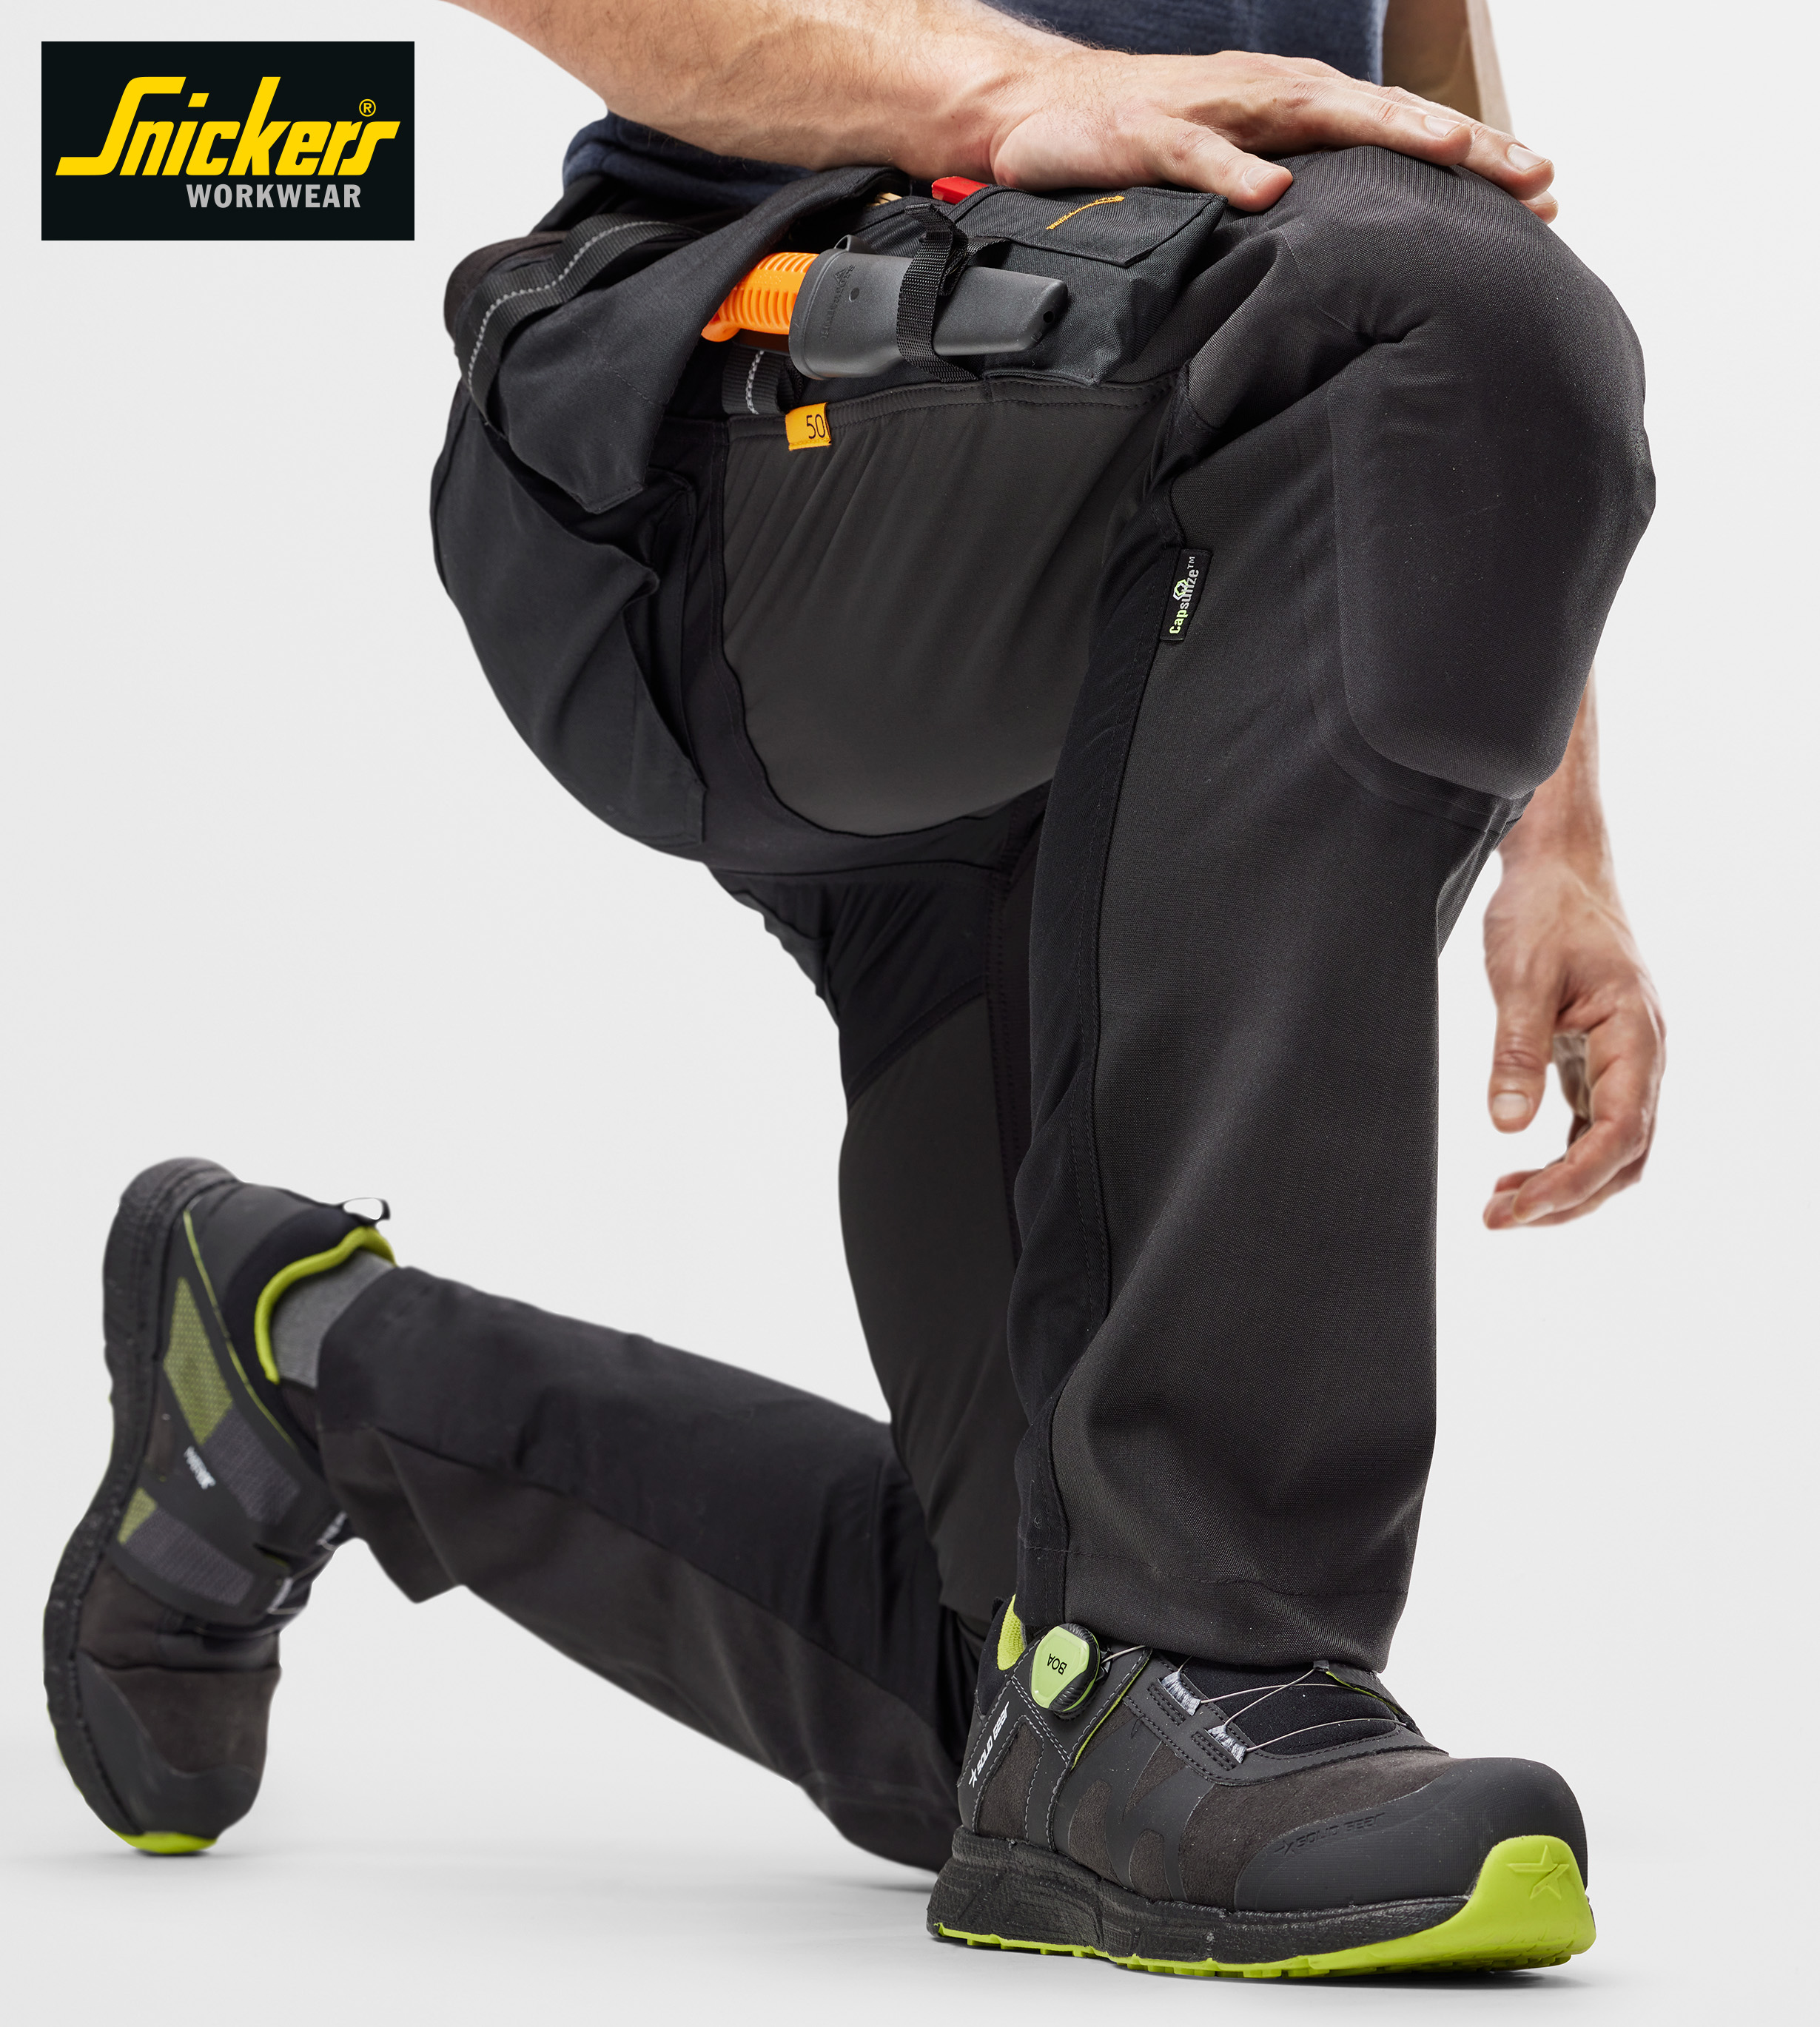 A World’s First - Snickers Workwear’s New Integrated Kneepad System.